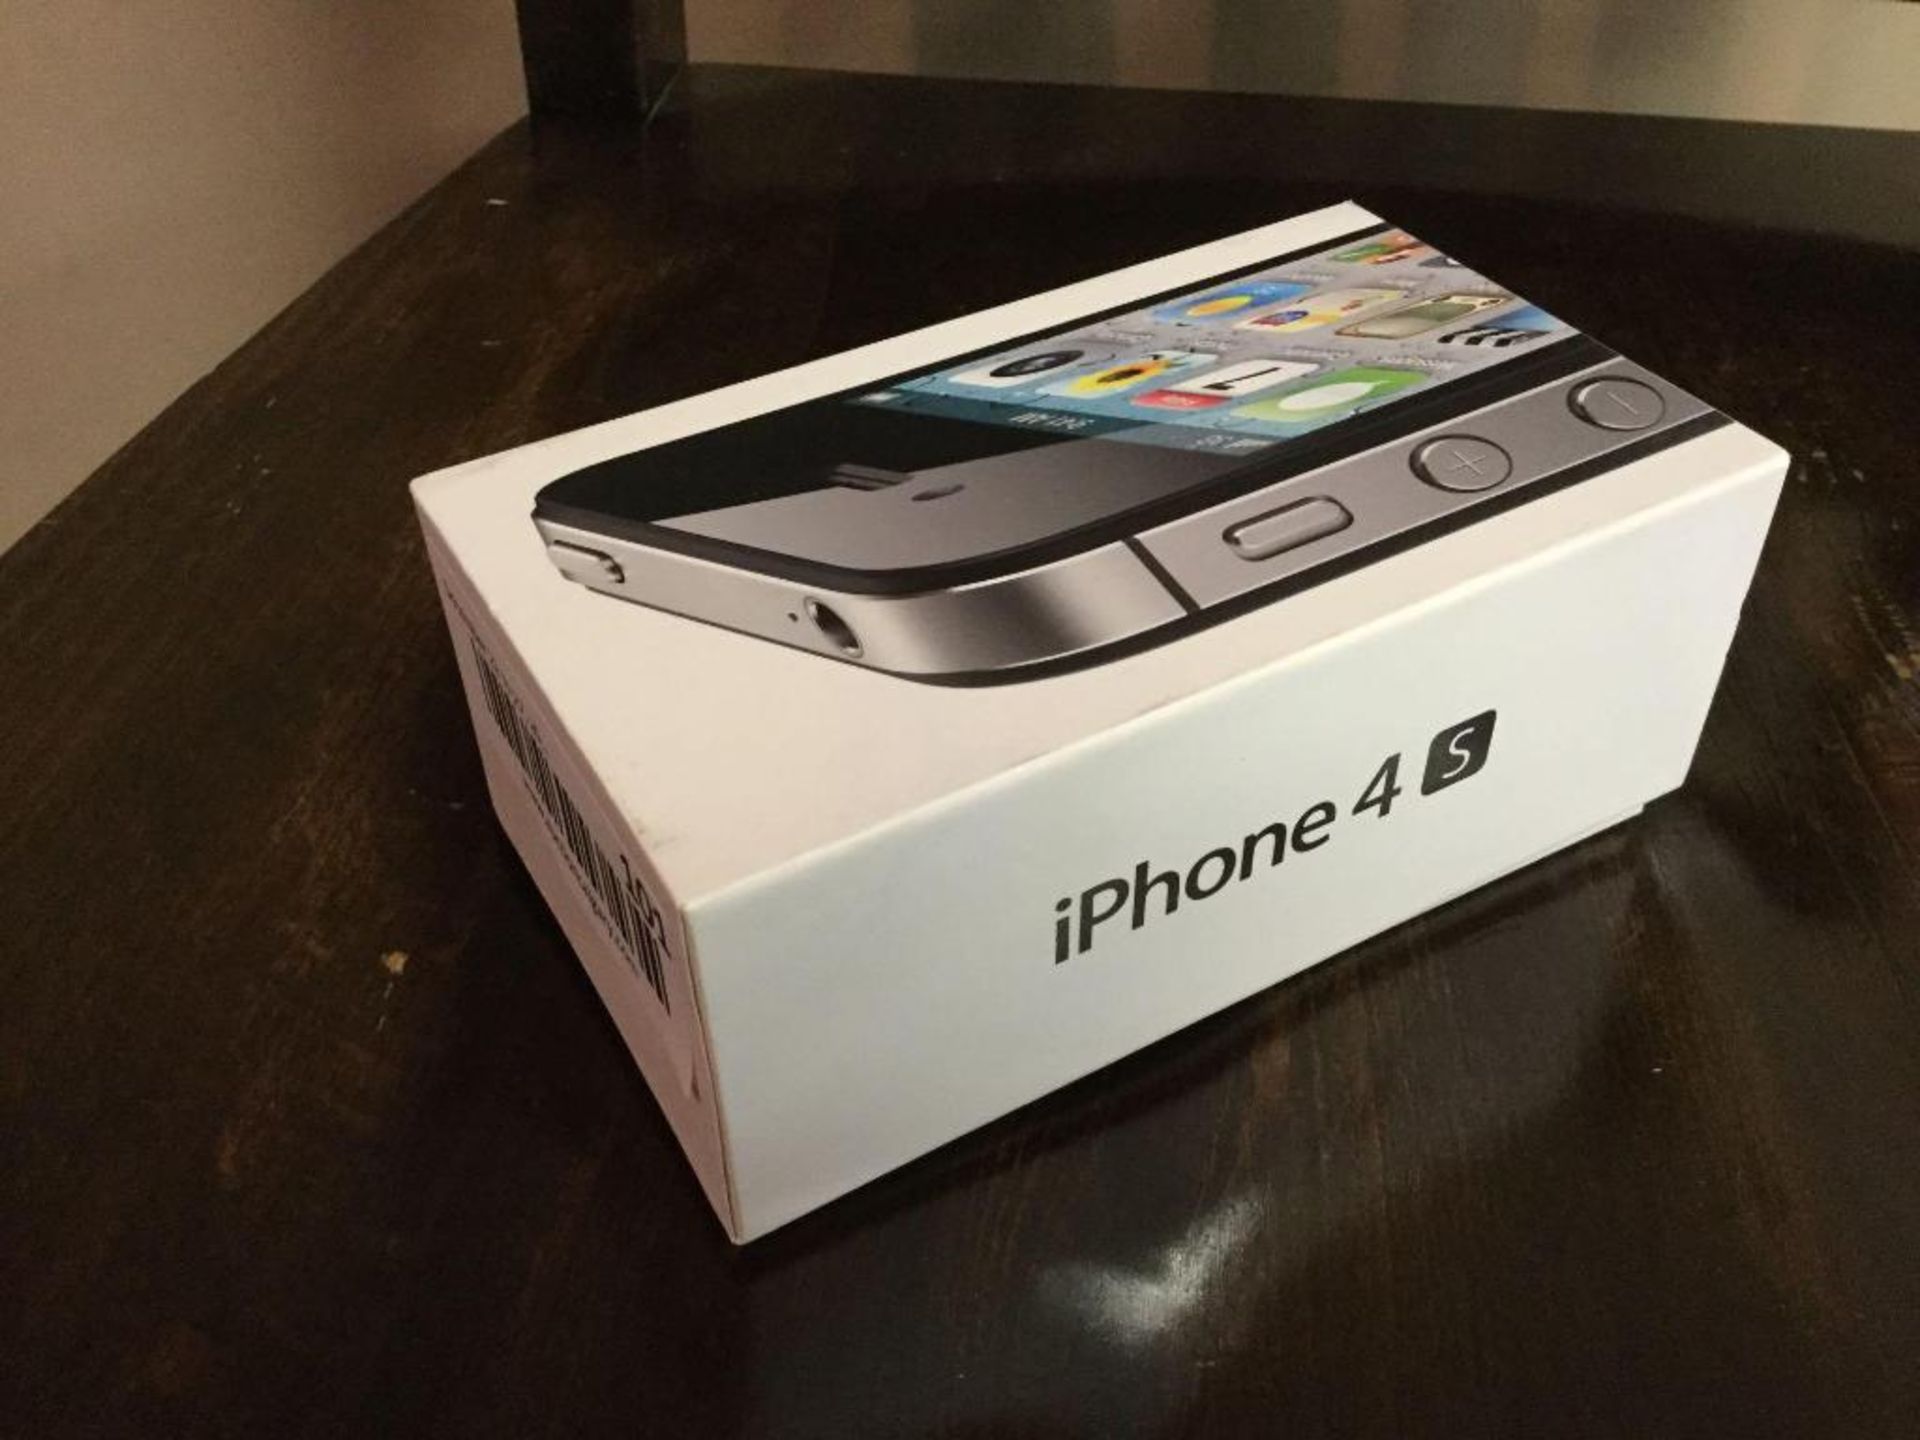 iPhone 4 S In box with Charger